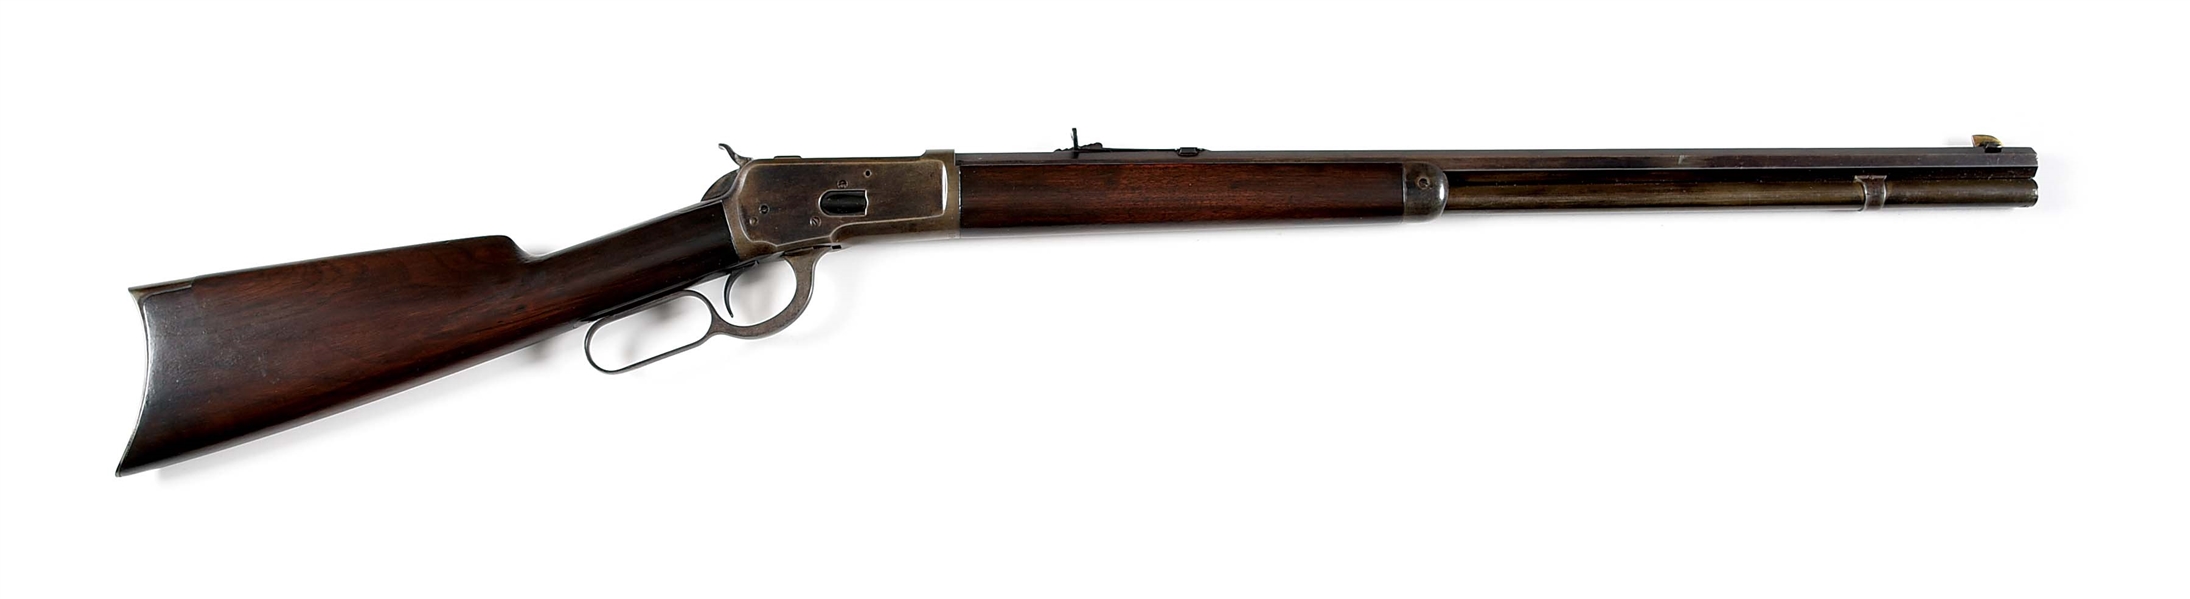 (A) FIRST YEAR OF PRODUCTION WINCHESTER 1892 LEVER ACTION RIFLE. 